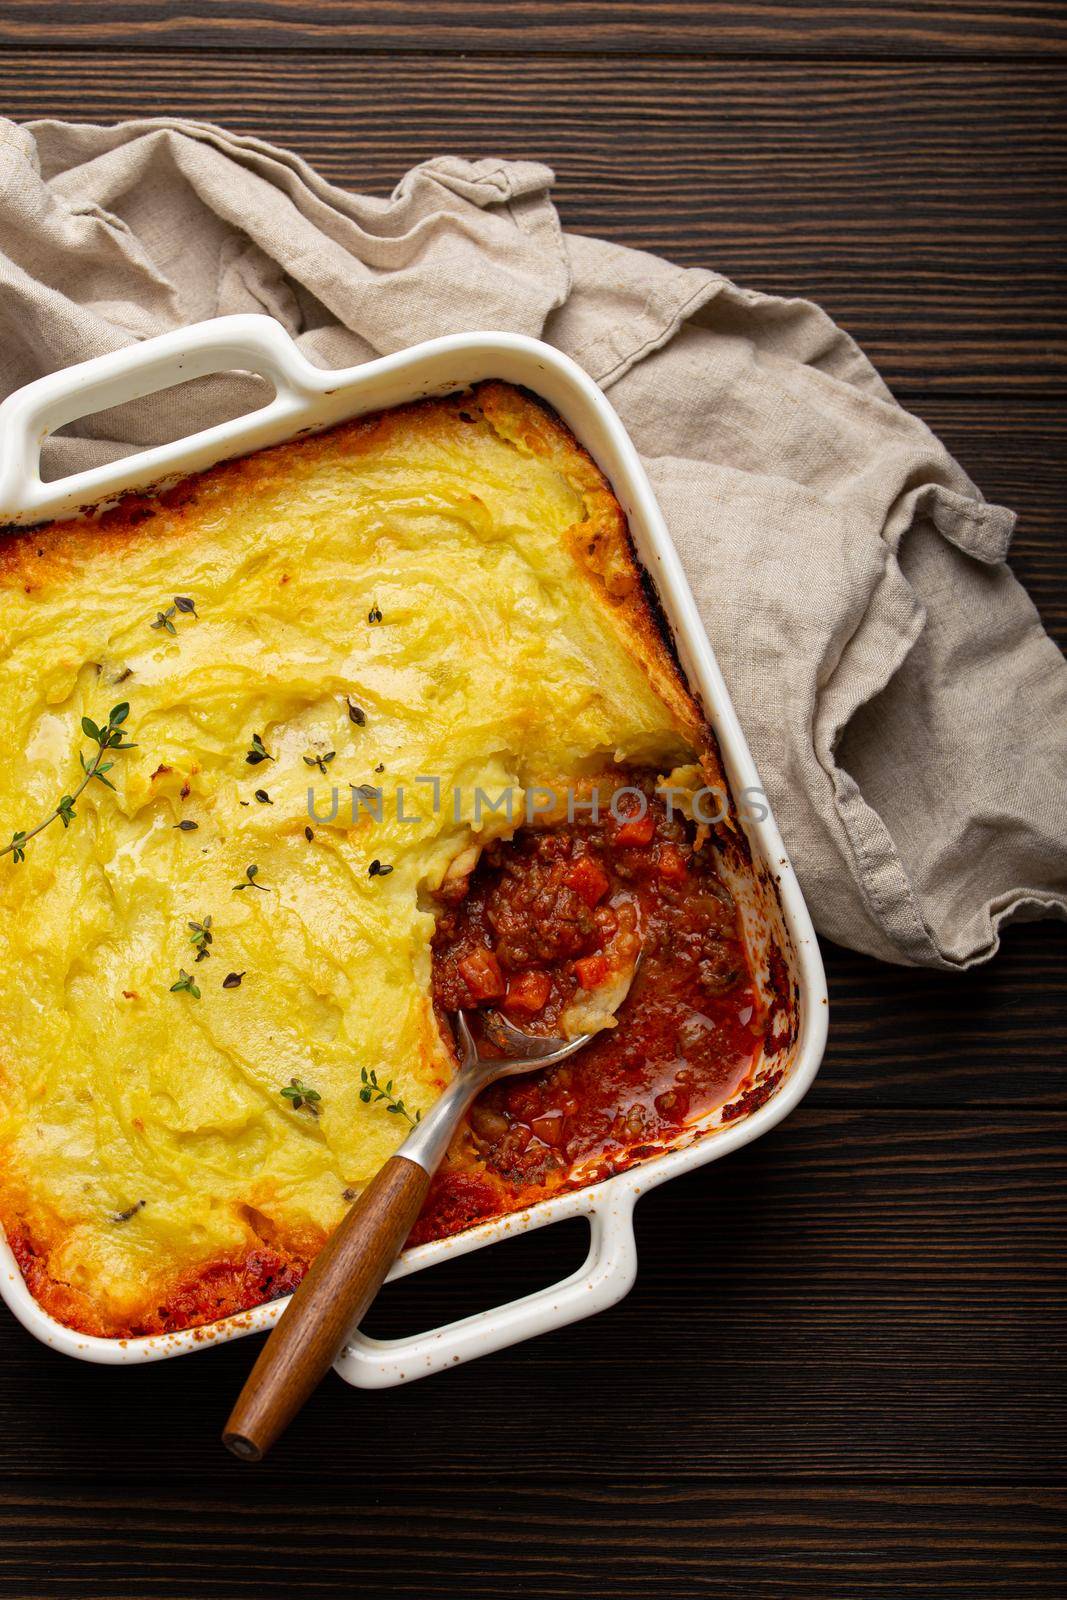 Traditional British dish Shepherd's pie casserole from above by its_al_dente